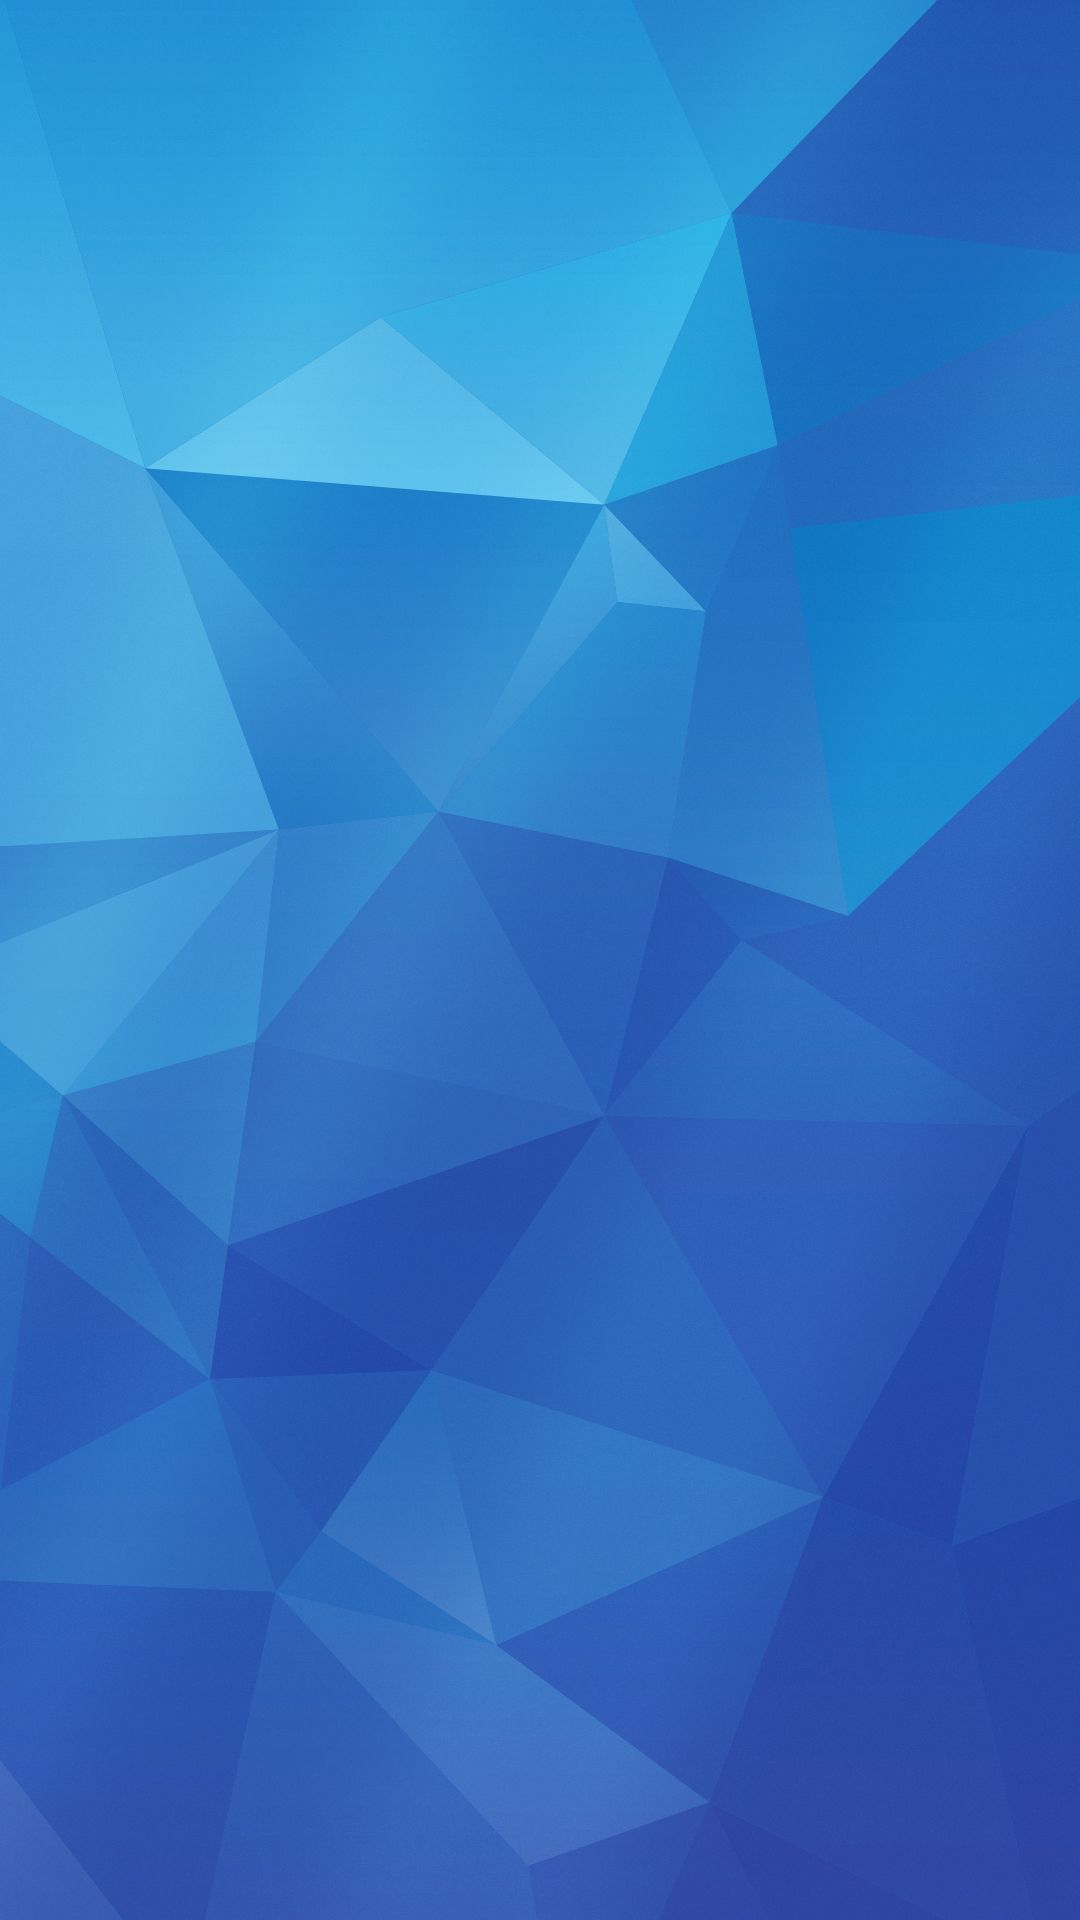 Blue vectorK wallpaper, free and easy to download